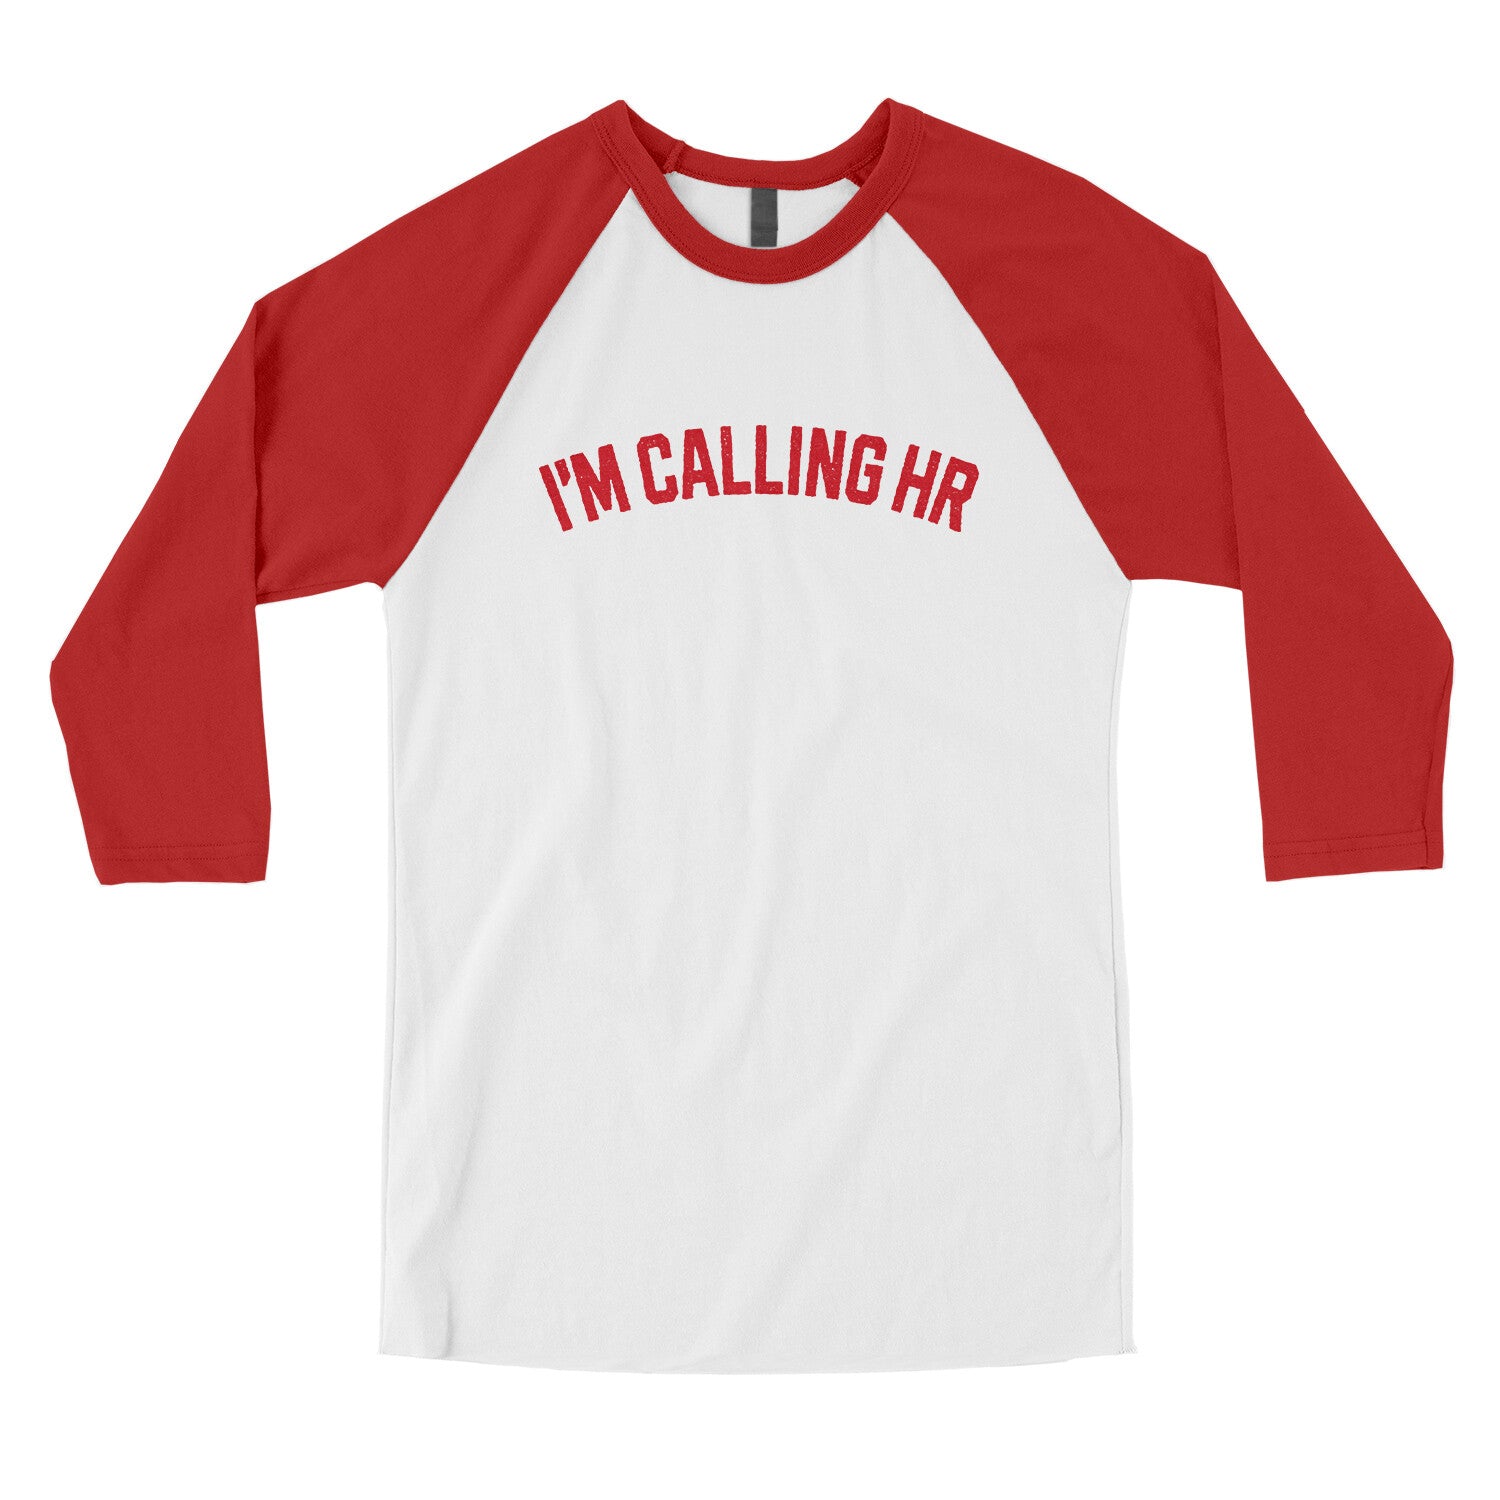 I'm Calling HR in White with Red Color